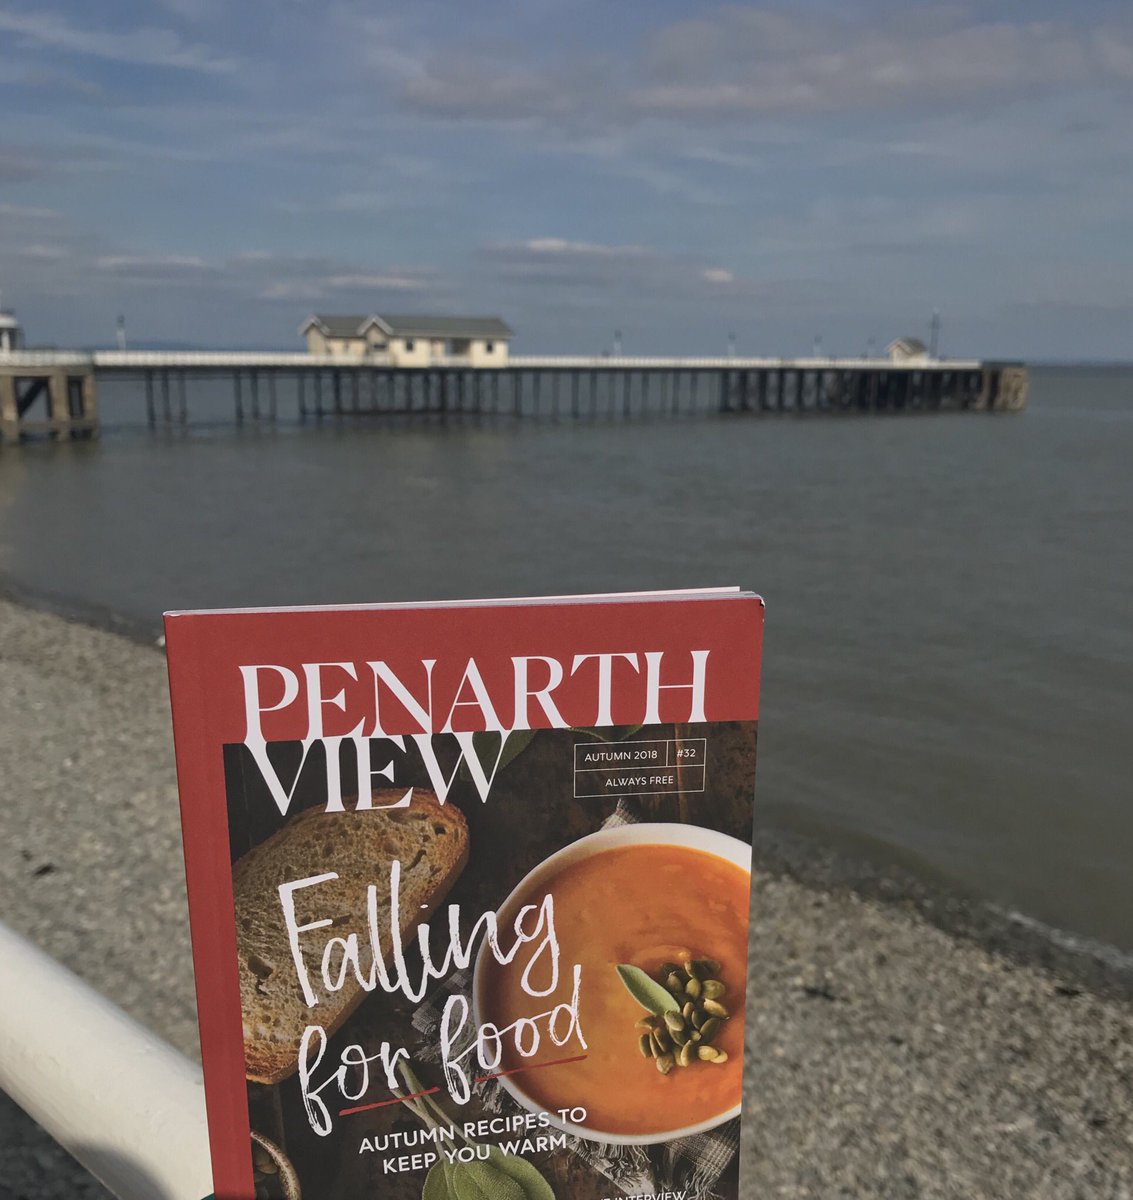 Back in my favourite office with @PenarthView #LovePenarth #pv32 #penarth